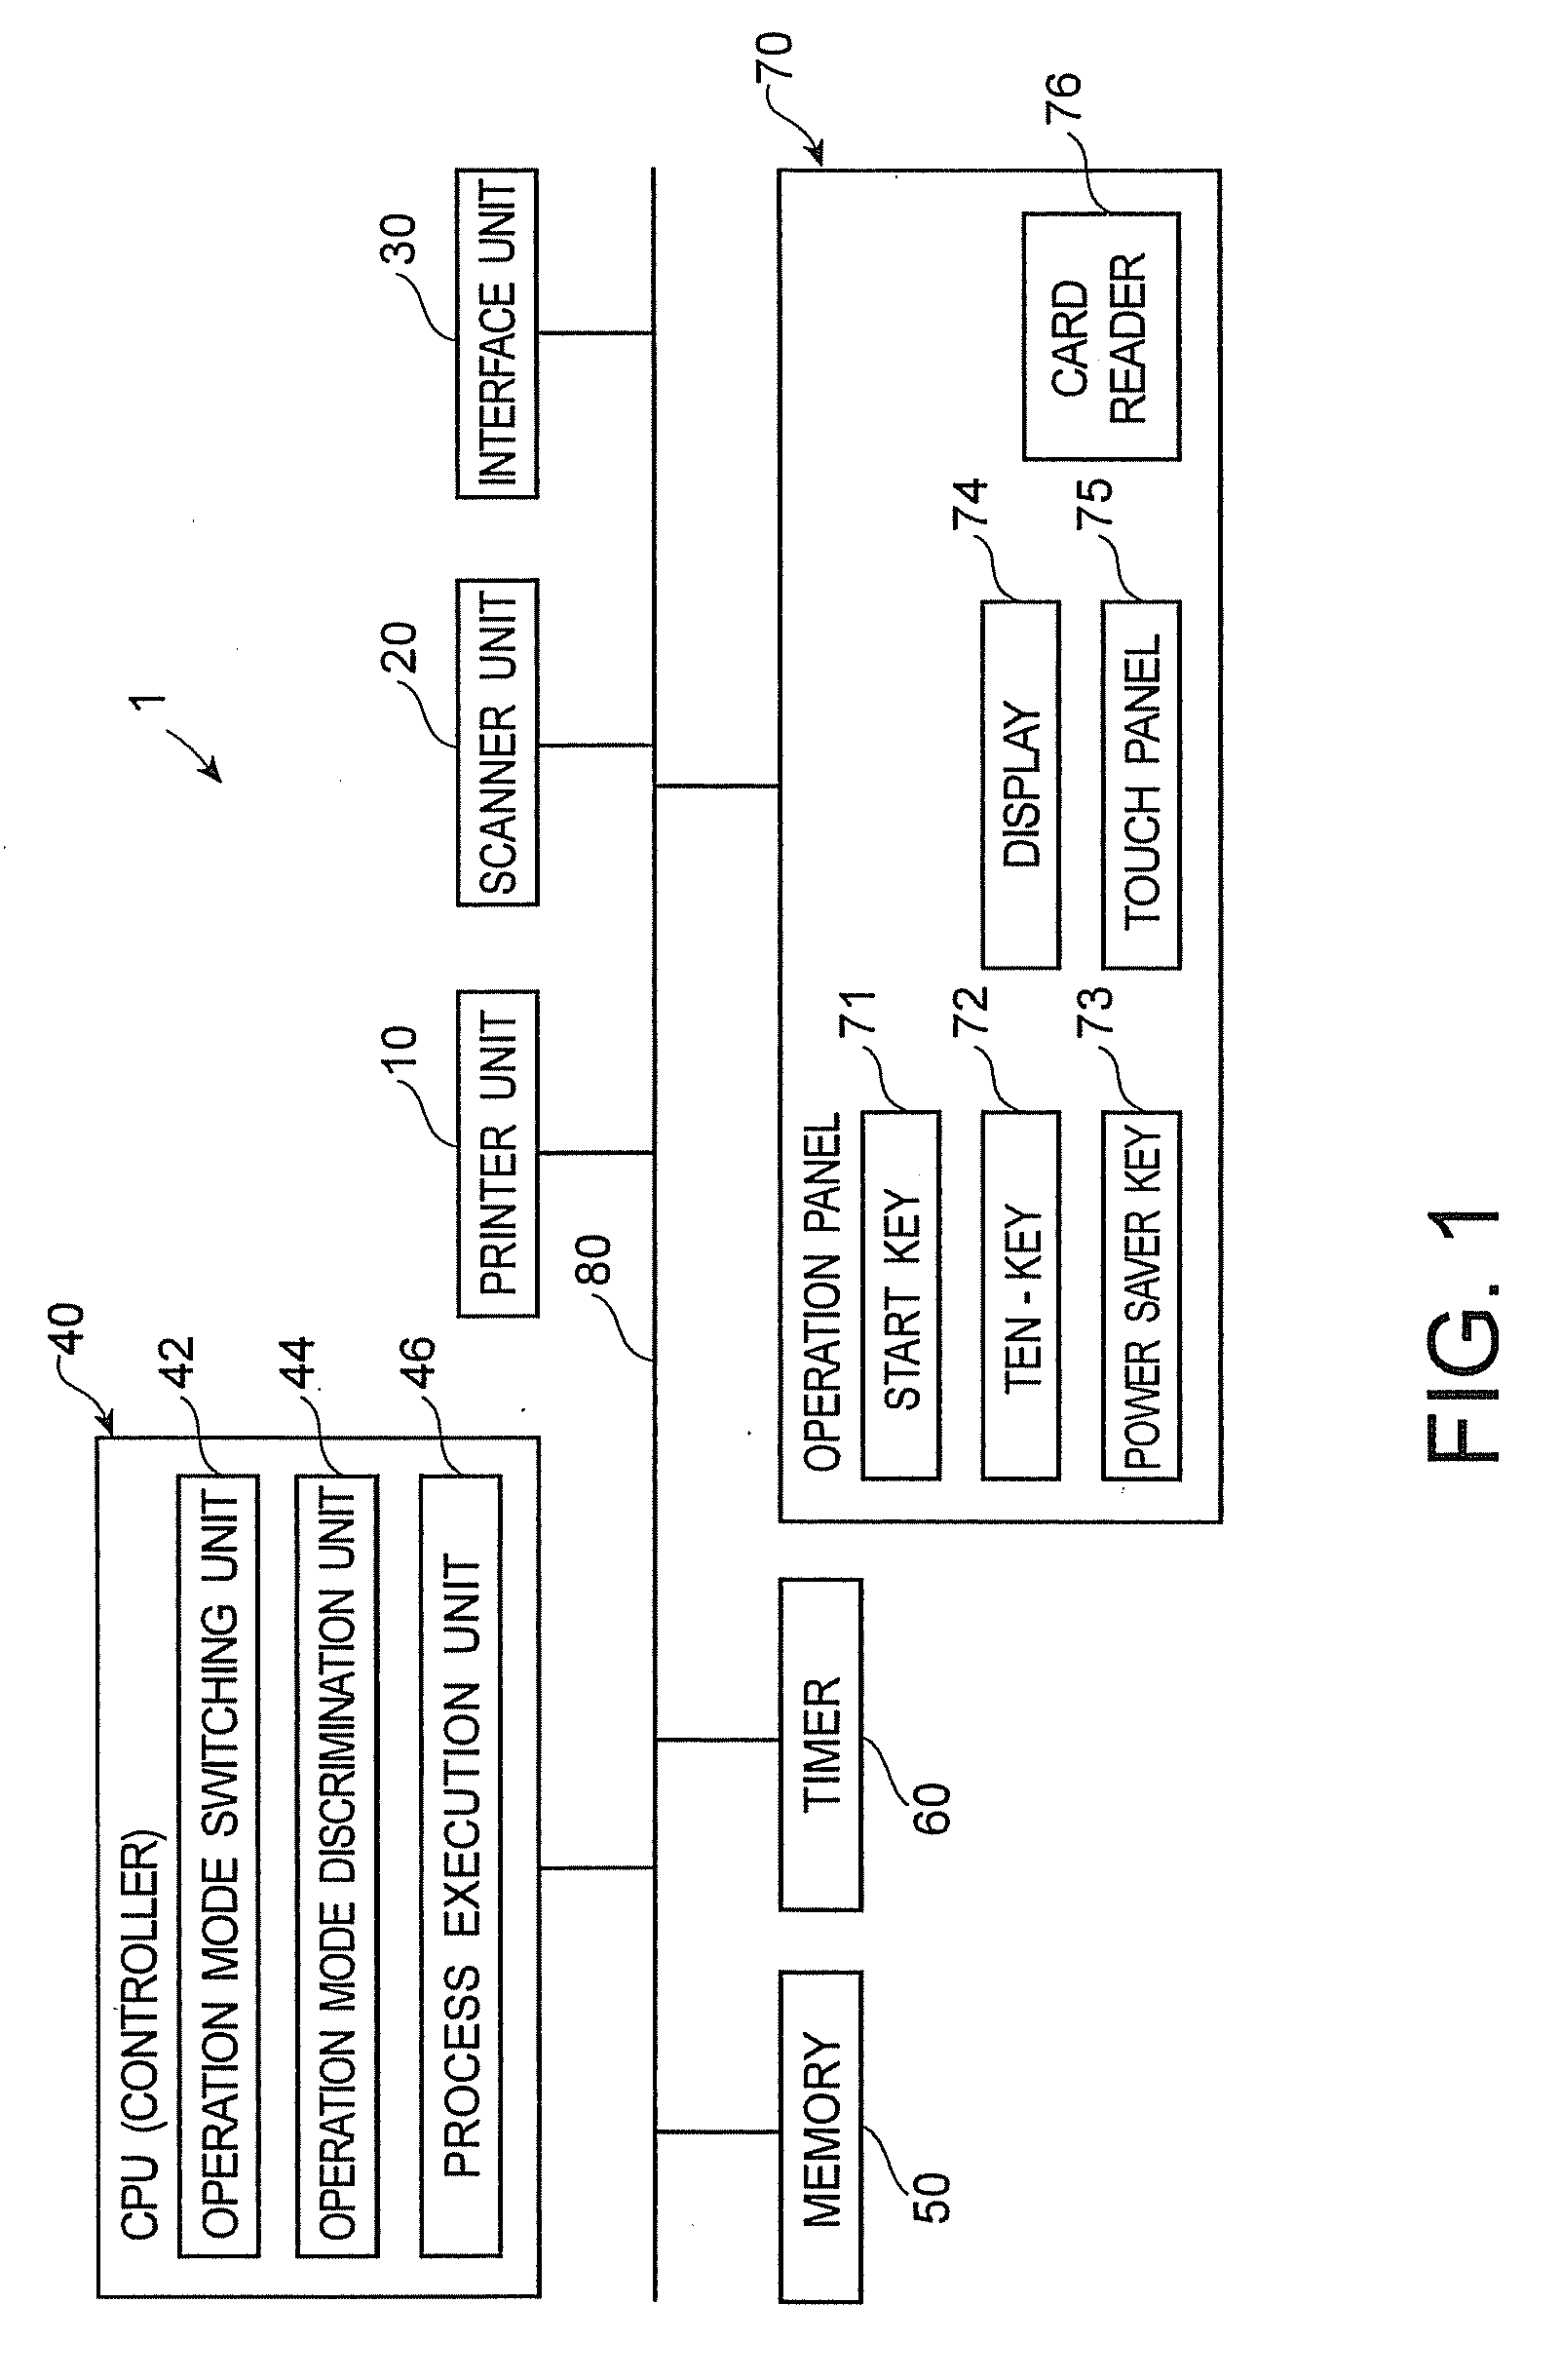 Image processing apparatus and operation mode switching control method for the same